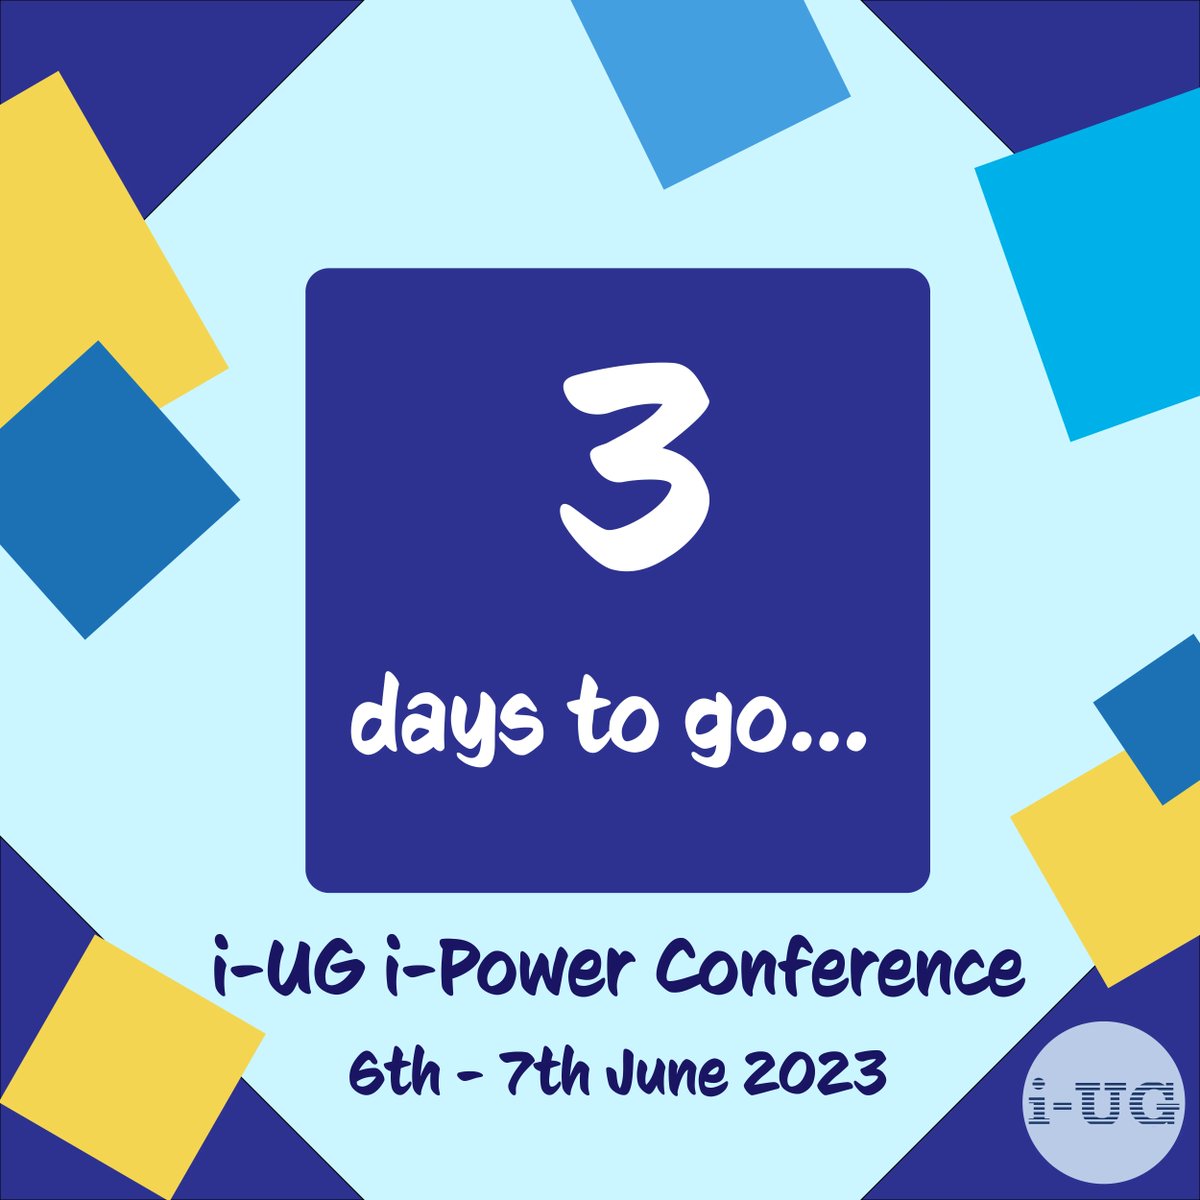 3 DAYS TO GO!! Our agenda is covering a range of IBMi hot topics, will you be attending the conference? Register today… buff.ly/41YbEim  #IBMi #techconference #educate #iug